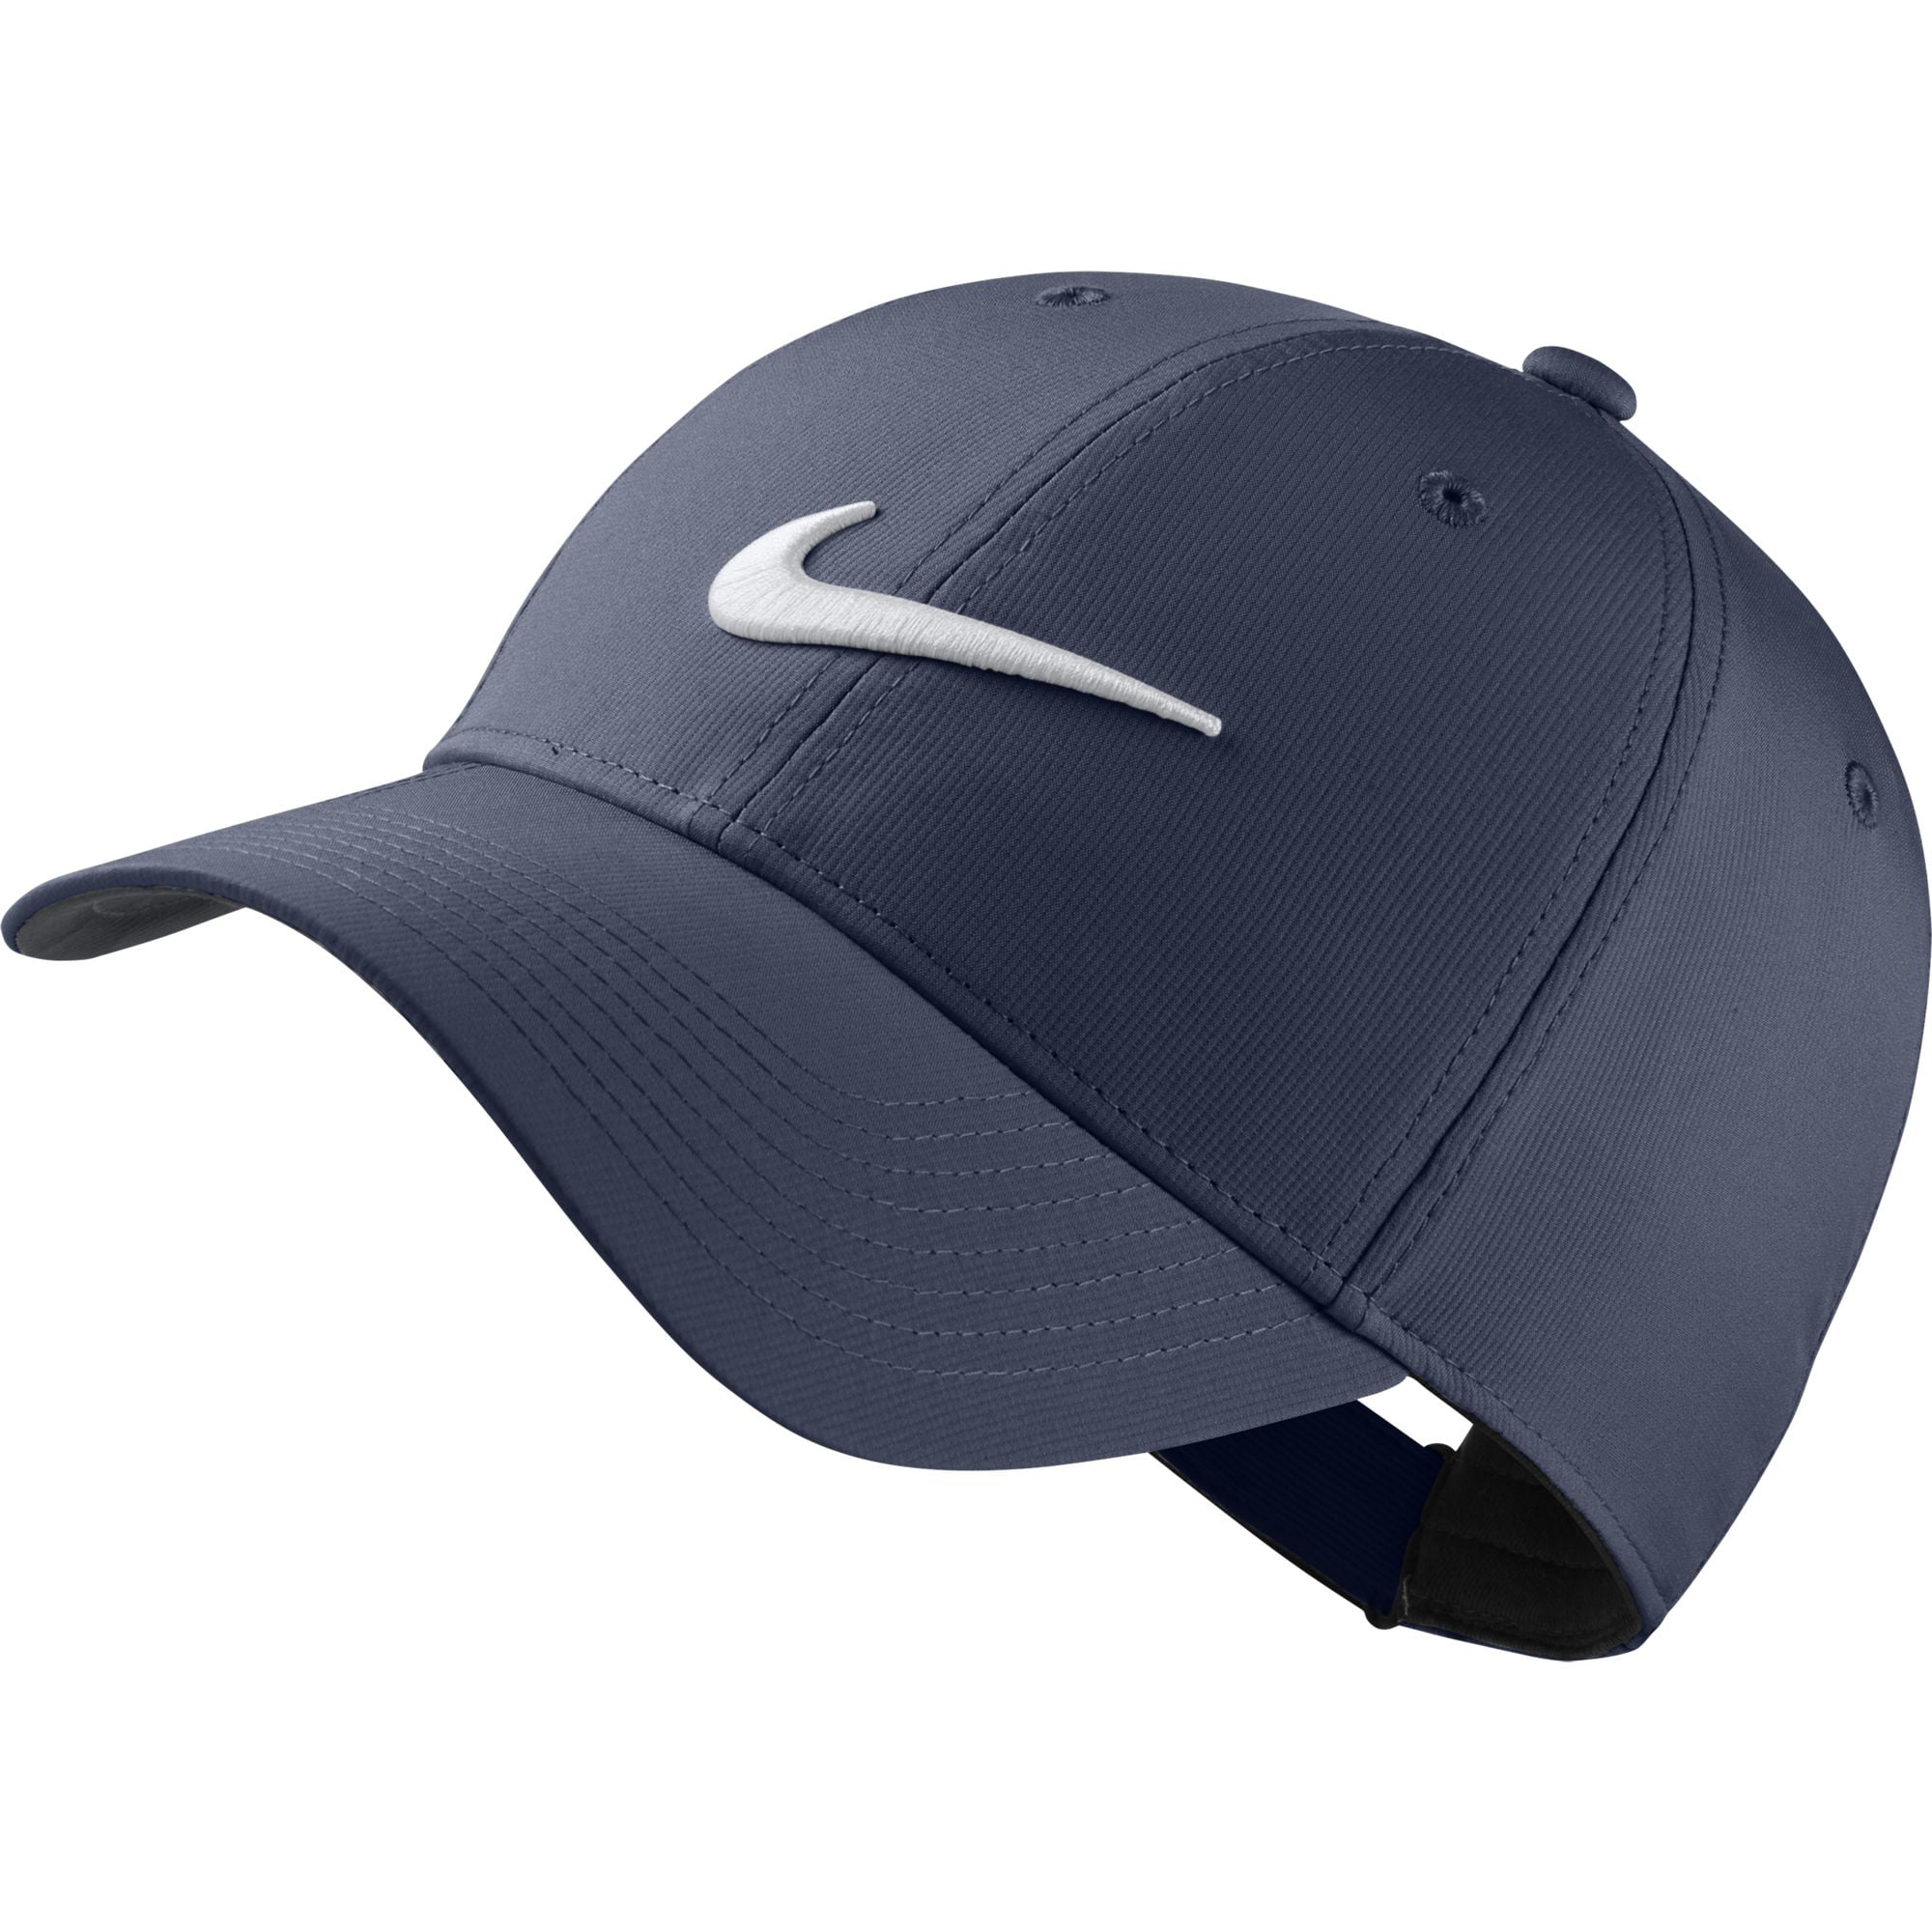 NEW 2018 Nike Legacy91 Tech Adjustable Navy/Anthracite/White Hat/ Cap -